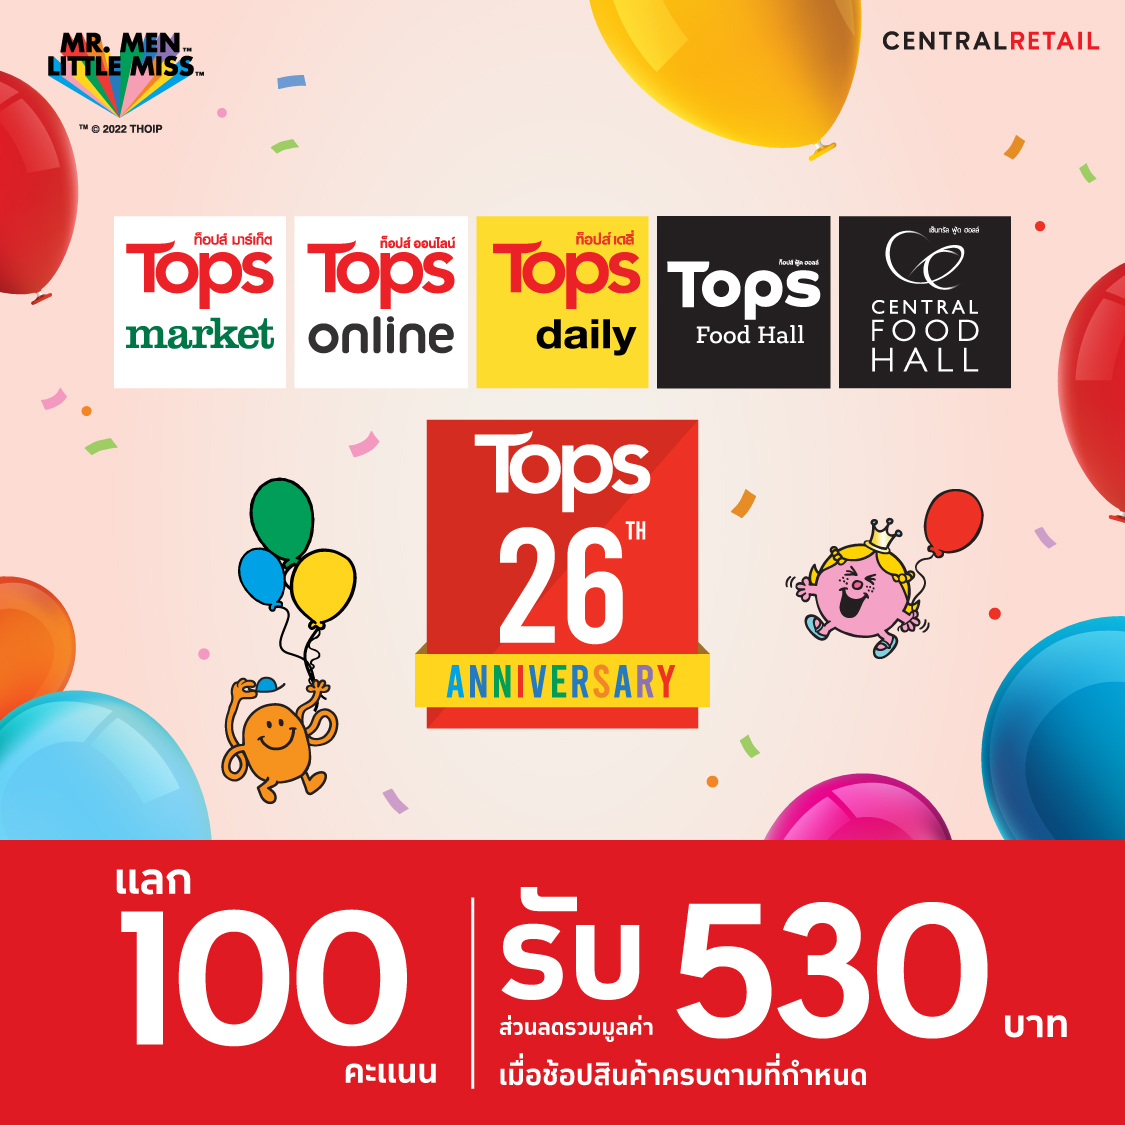 The 1 Tops Redeem 100 points Get discount worth up to 500 Baht when